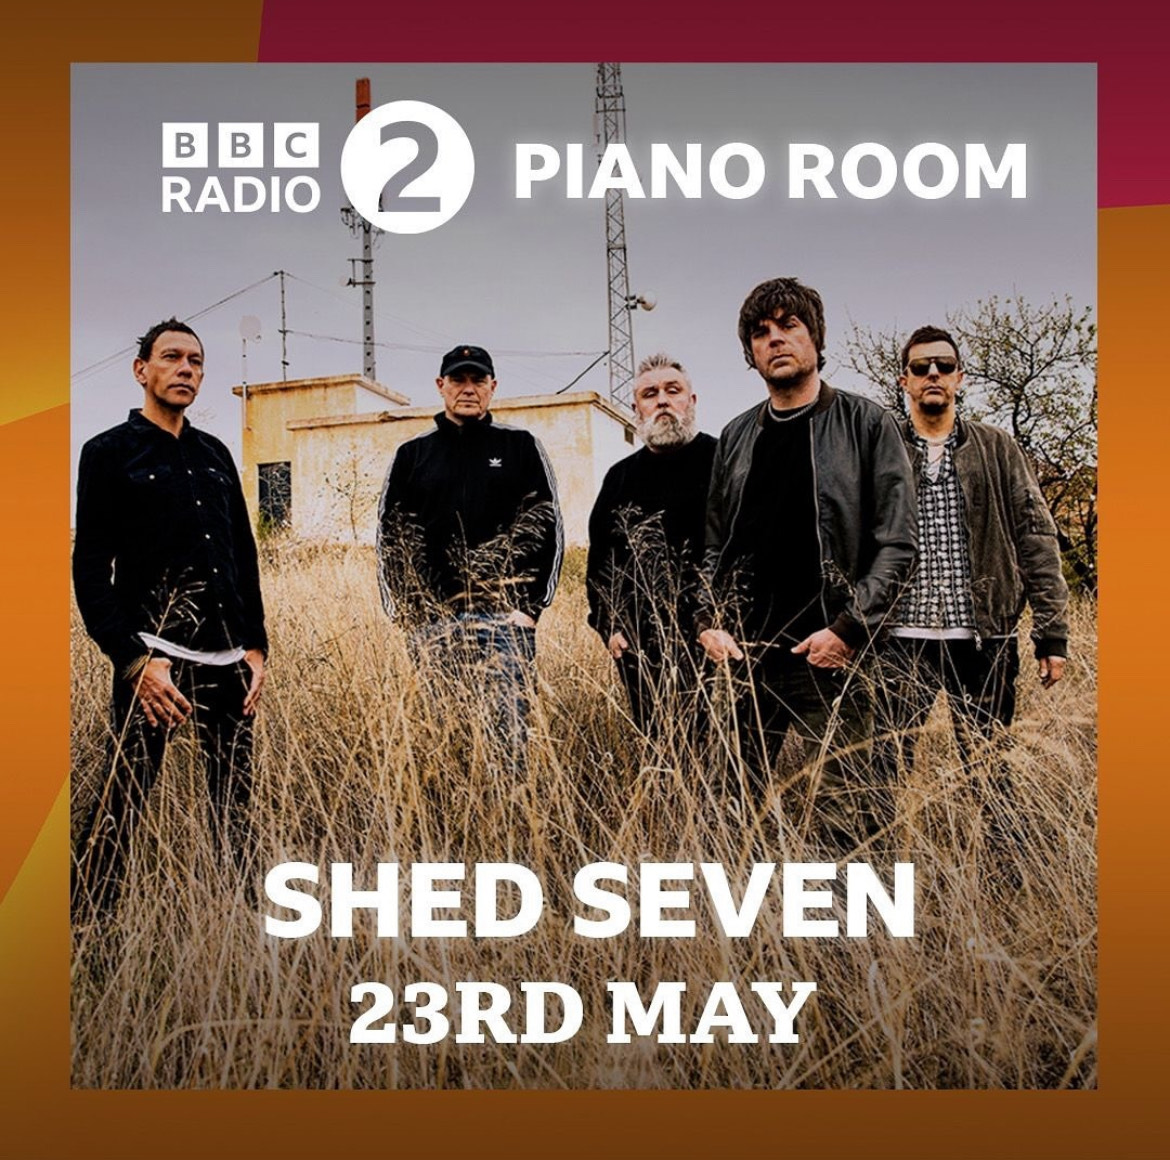 As our friend @vernonkay just announced on @BBCRadio2... we're coming to the Piano Rooms on 23rd May! Performing a new song, an old song and a cover! Tune in to hear us accompanied by the amazing BBC concert orchestra!!